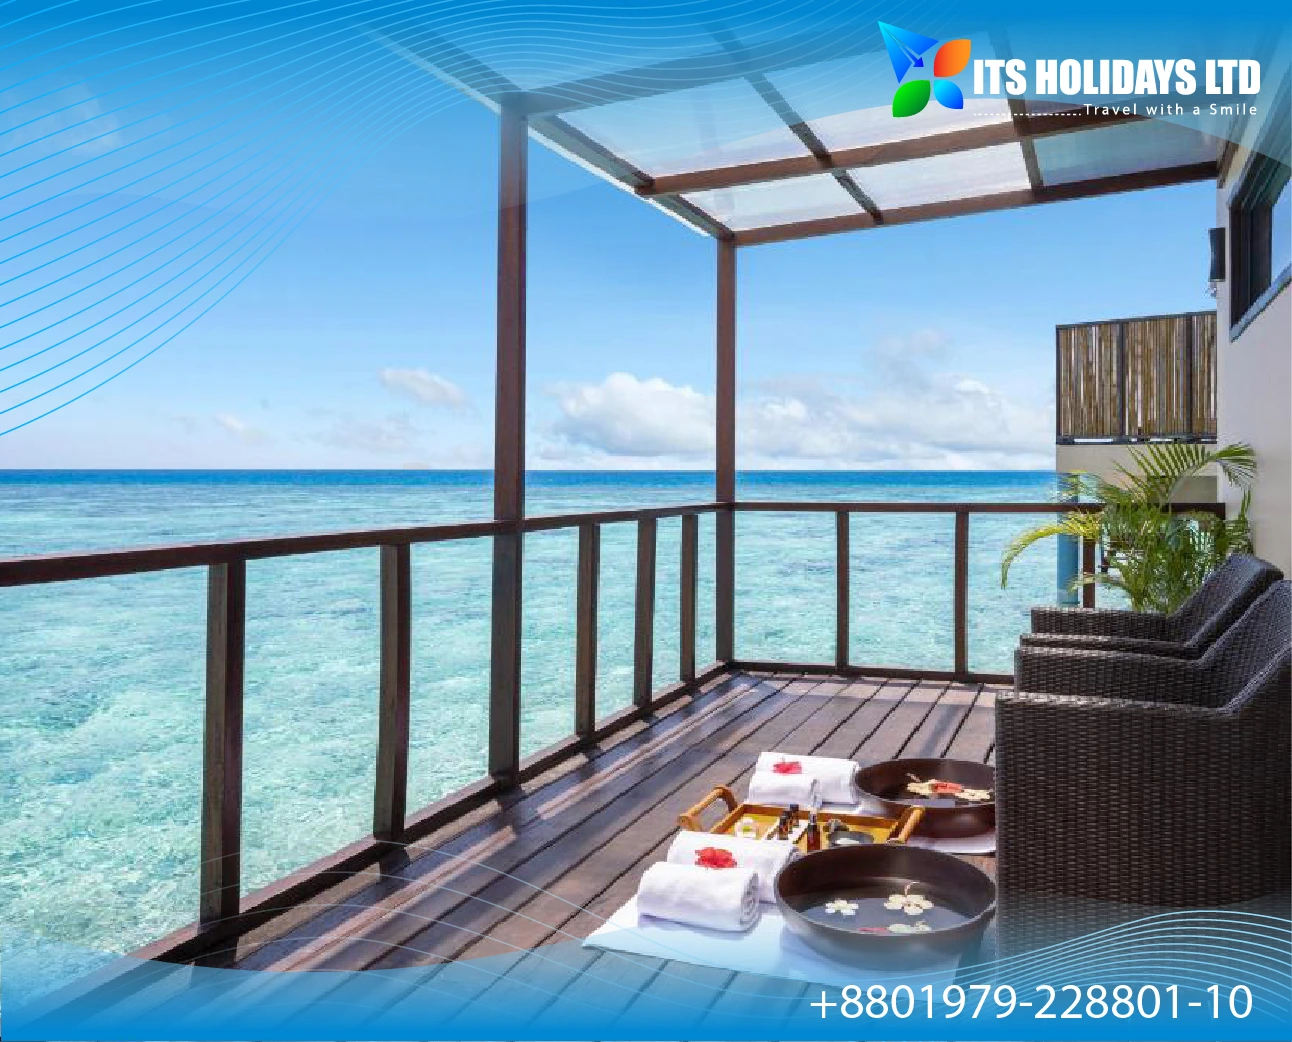 Romantic Maldives Tour Package from Bangladesh - 1